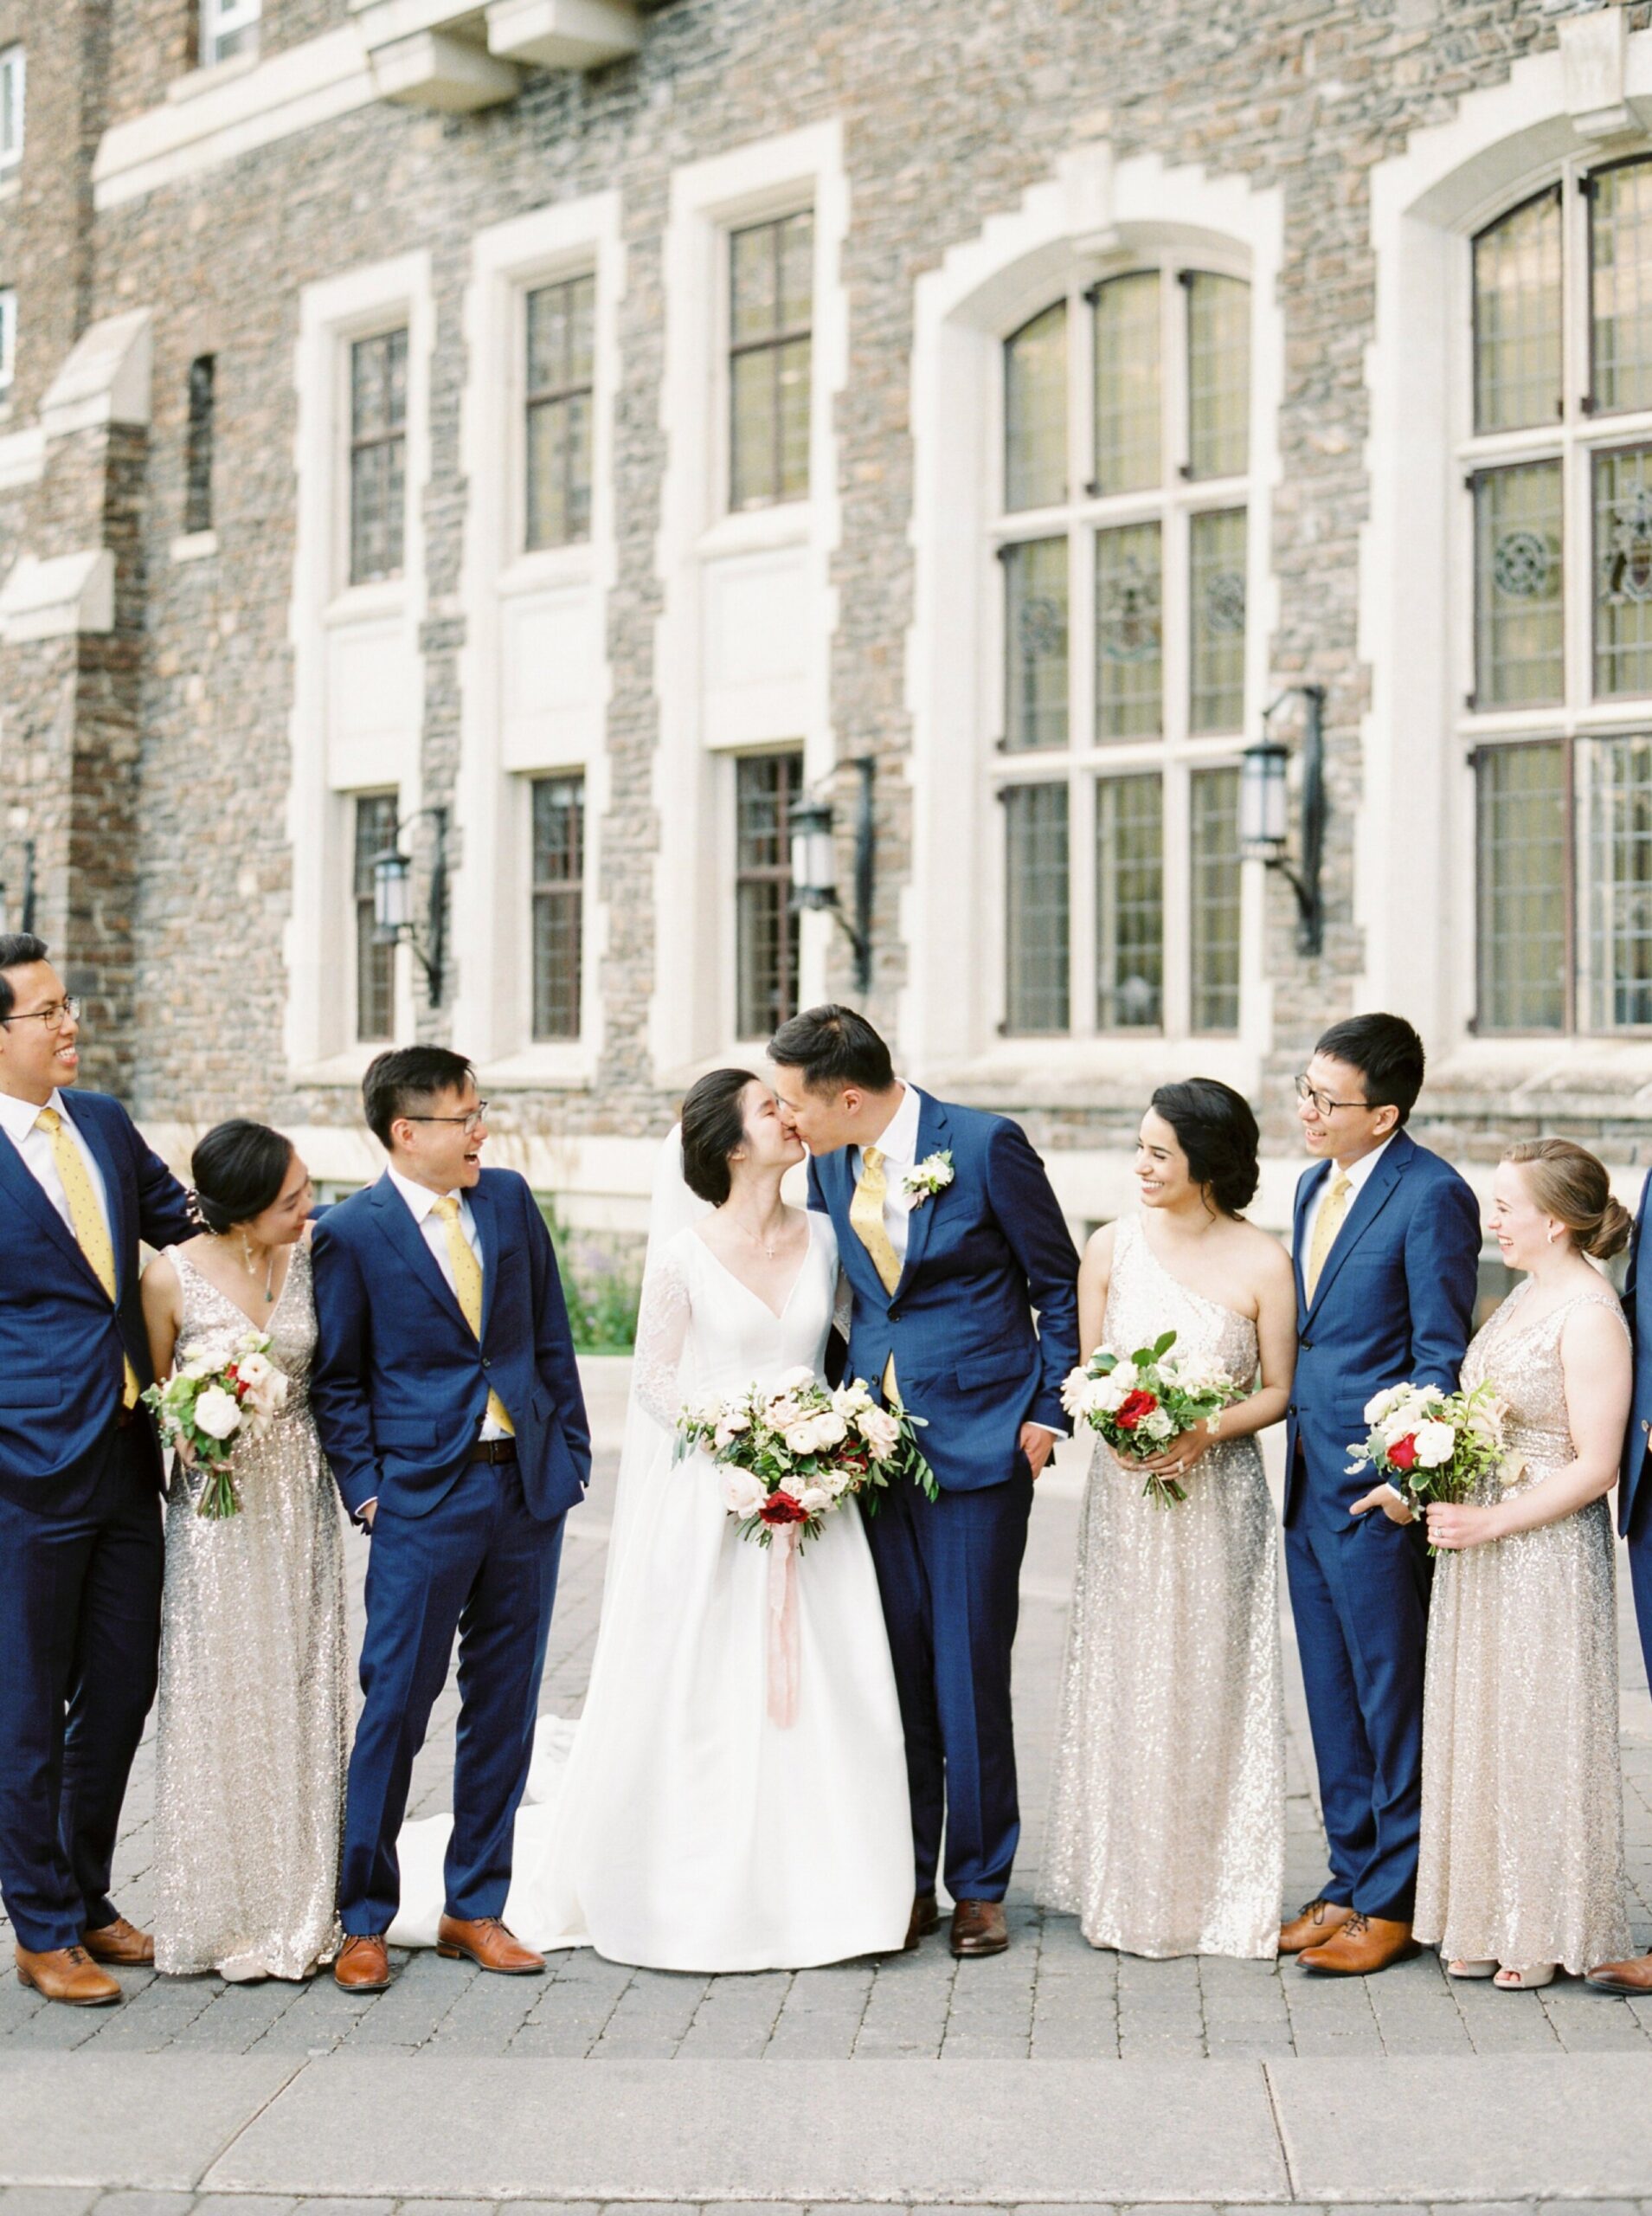  bridesmaids in gold maxi dress | Groomsmesn in Navy blue suits and yellow ties | Fairmont Banff Springs hotel wedding photographers | fine art film photography | portra 400 